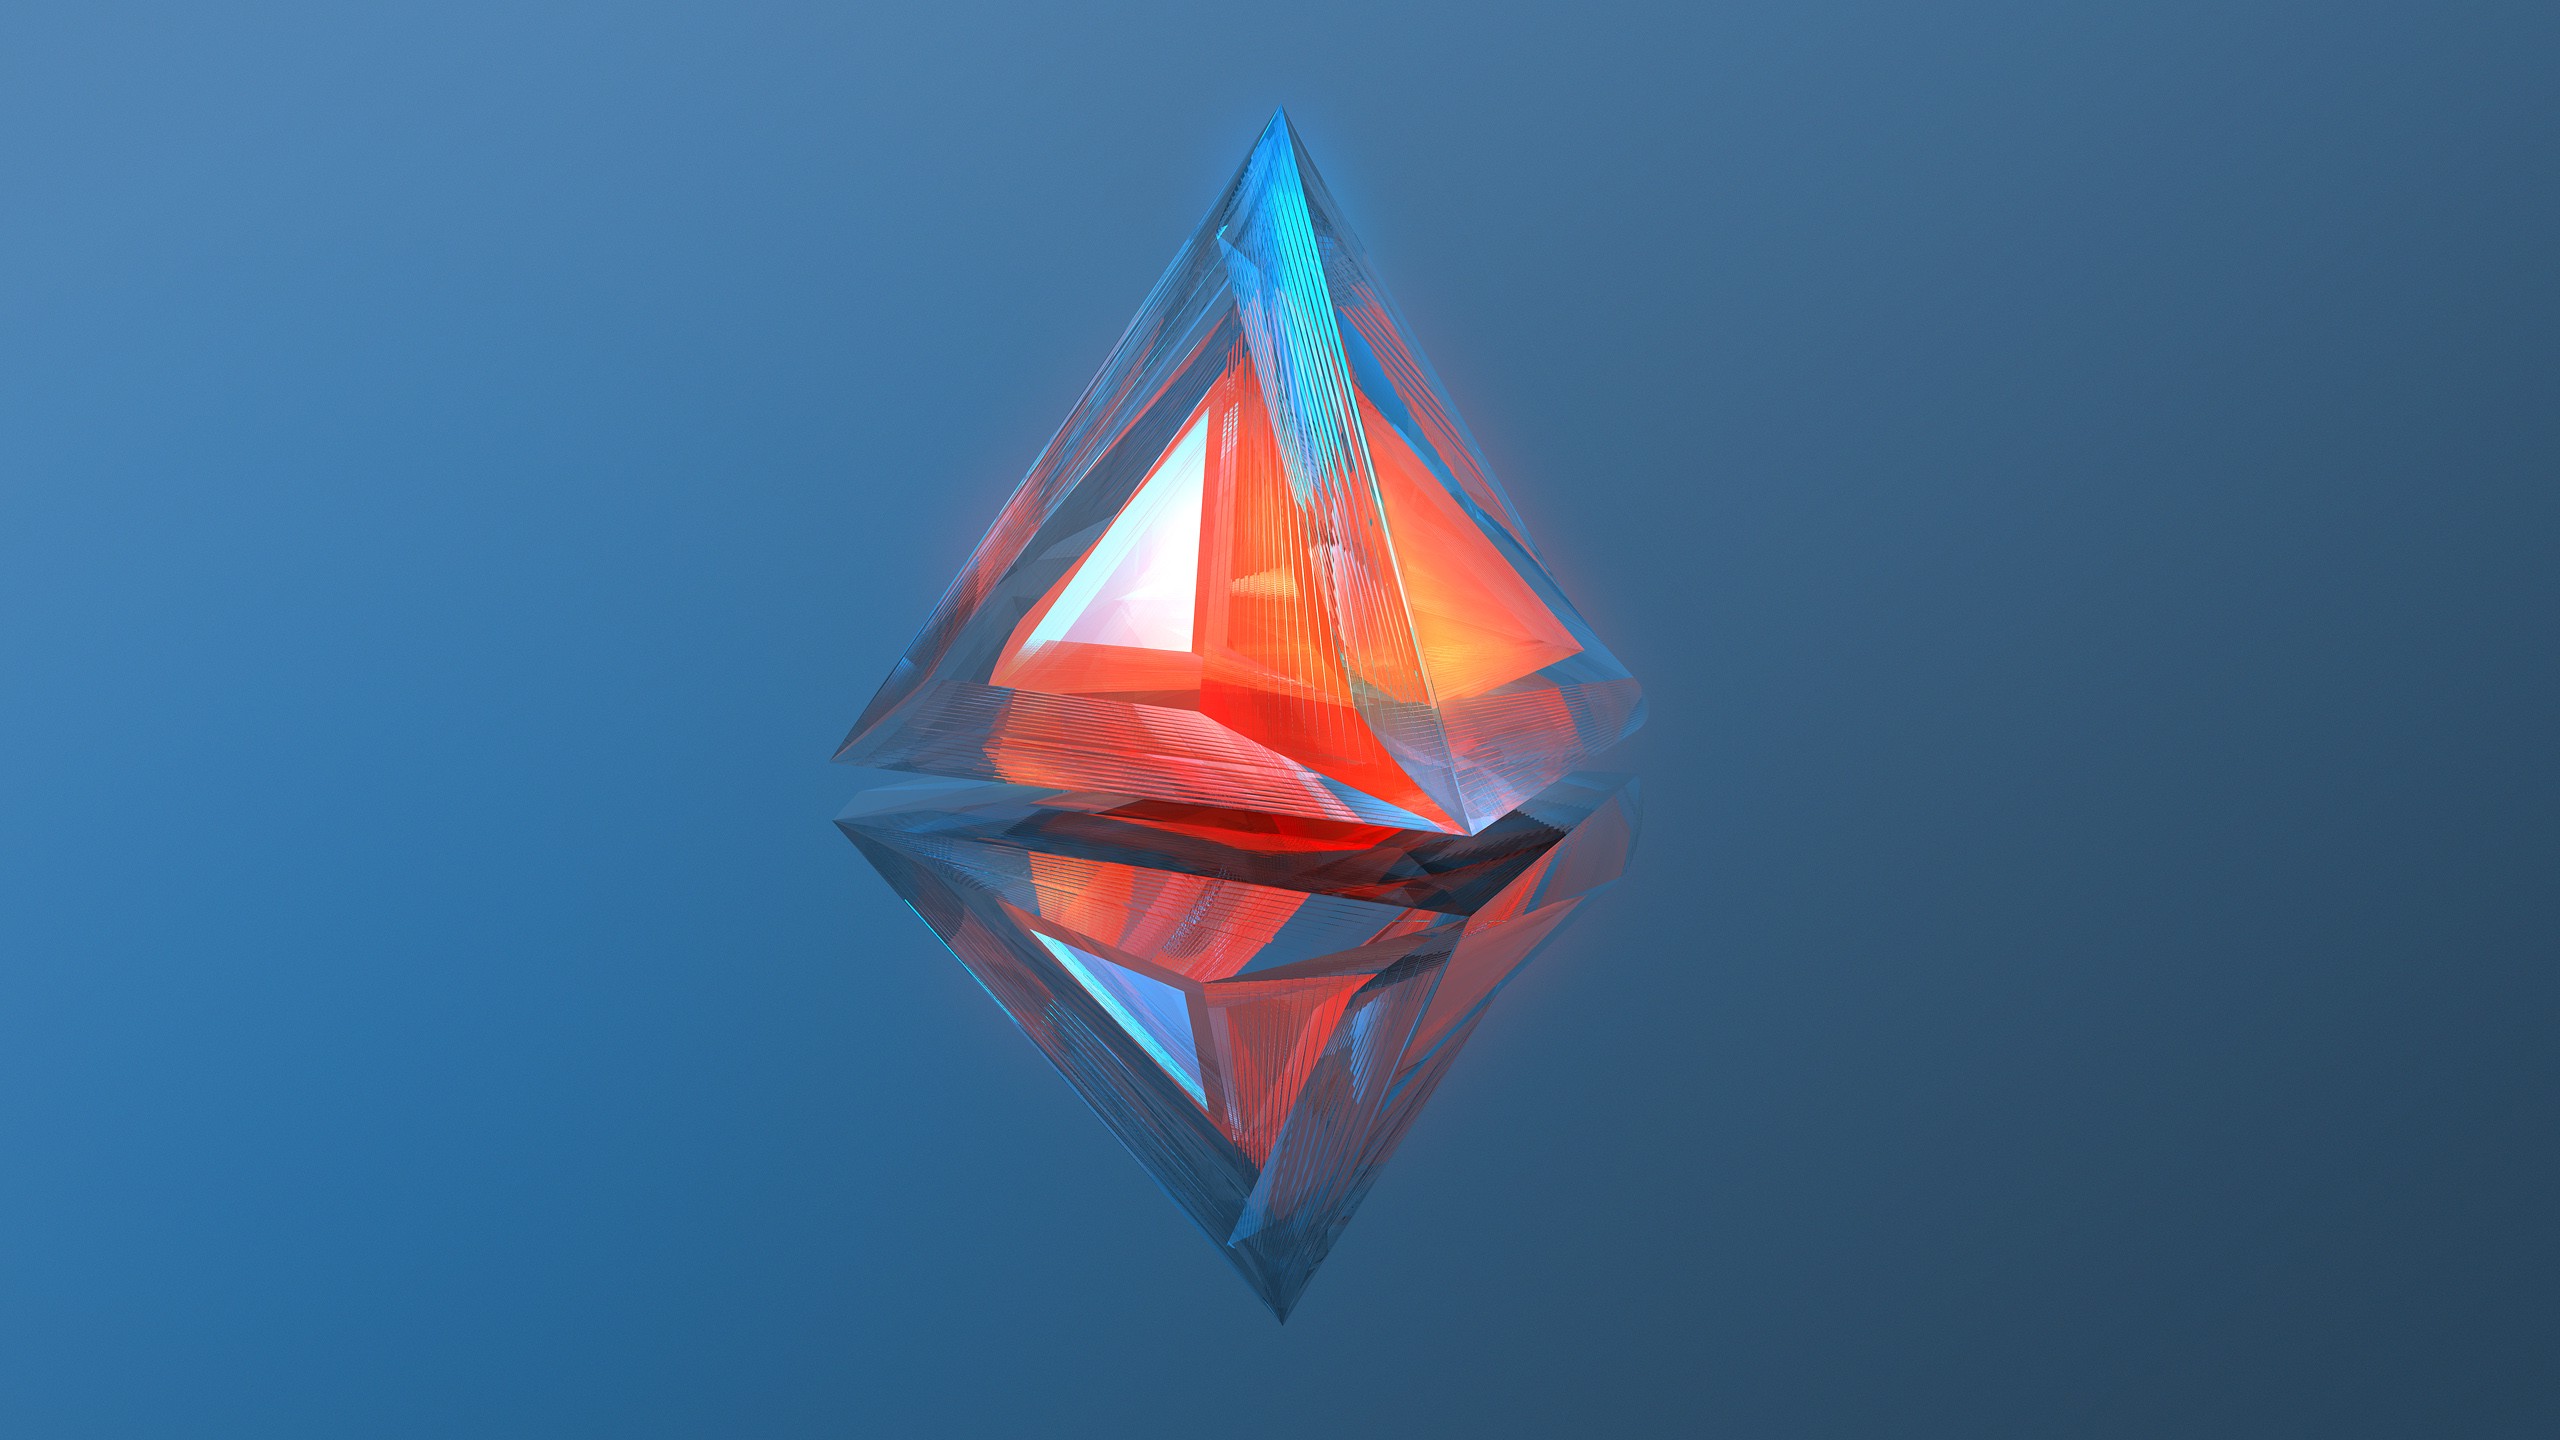 digital Art, Abstract, Minimalism, Geometry, Blue Background, 3D, Triangle, Reflection, Warm Colors, MKBHD Wallpaper